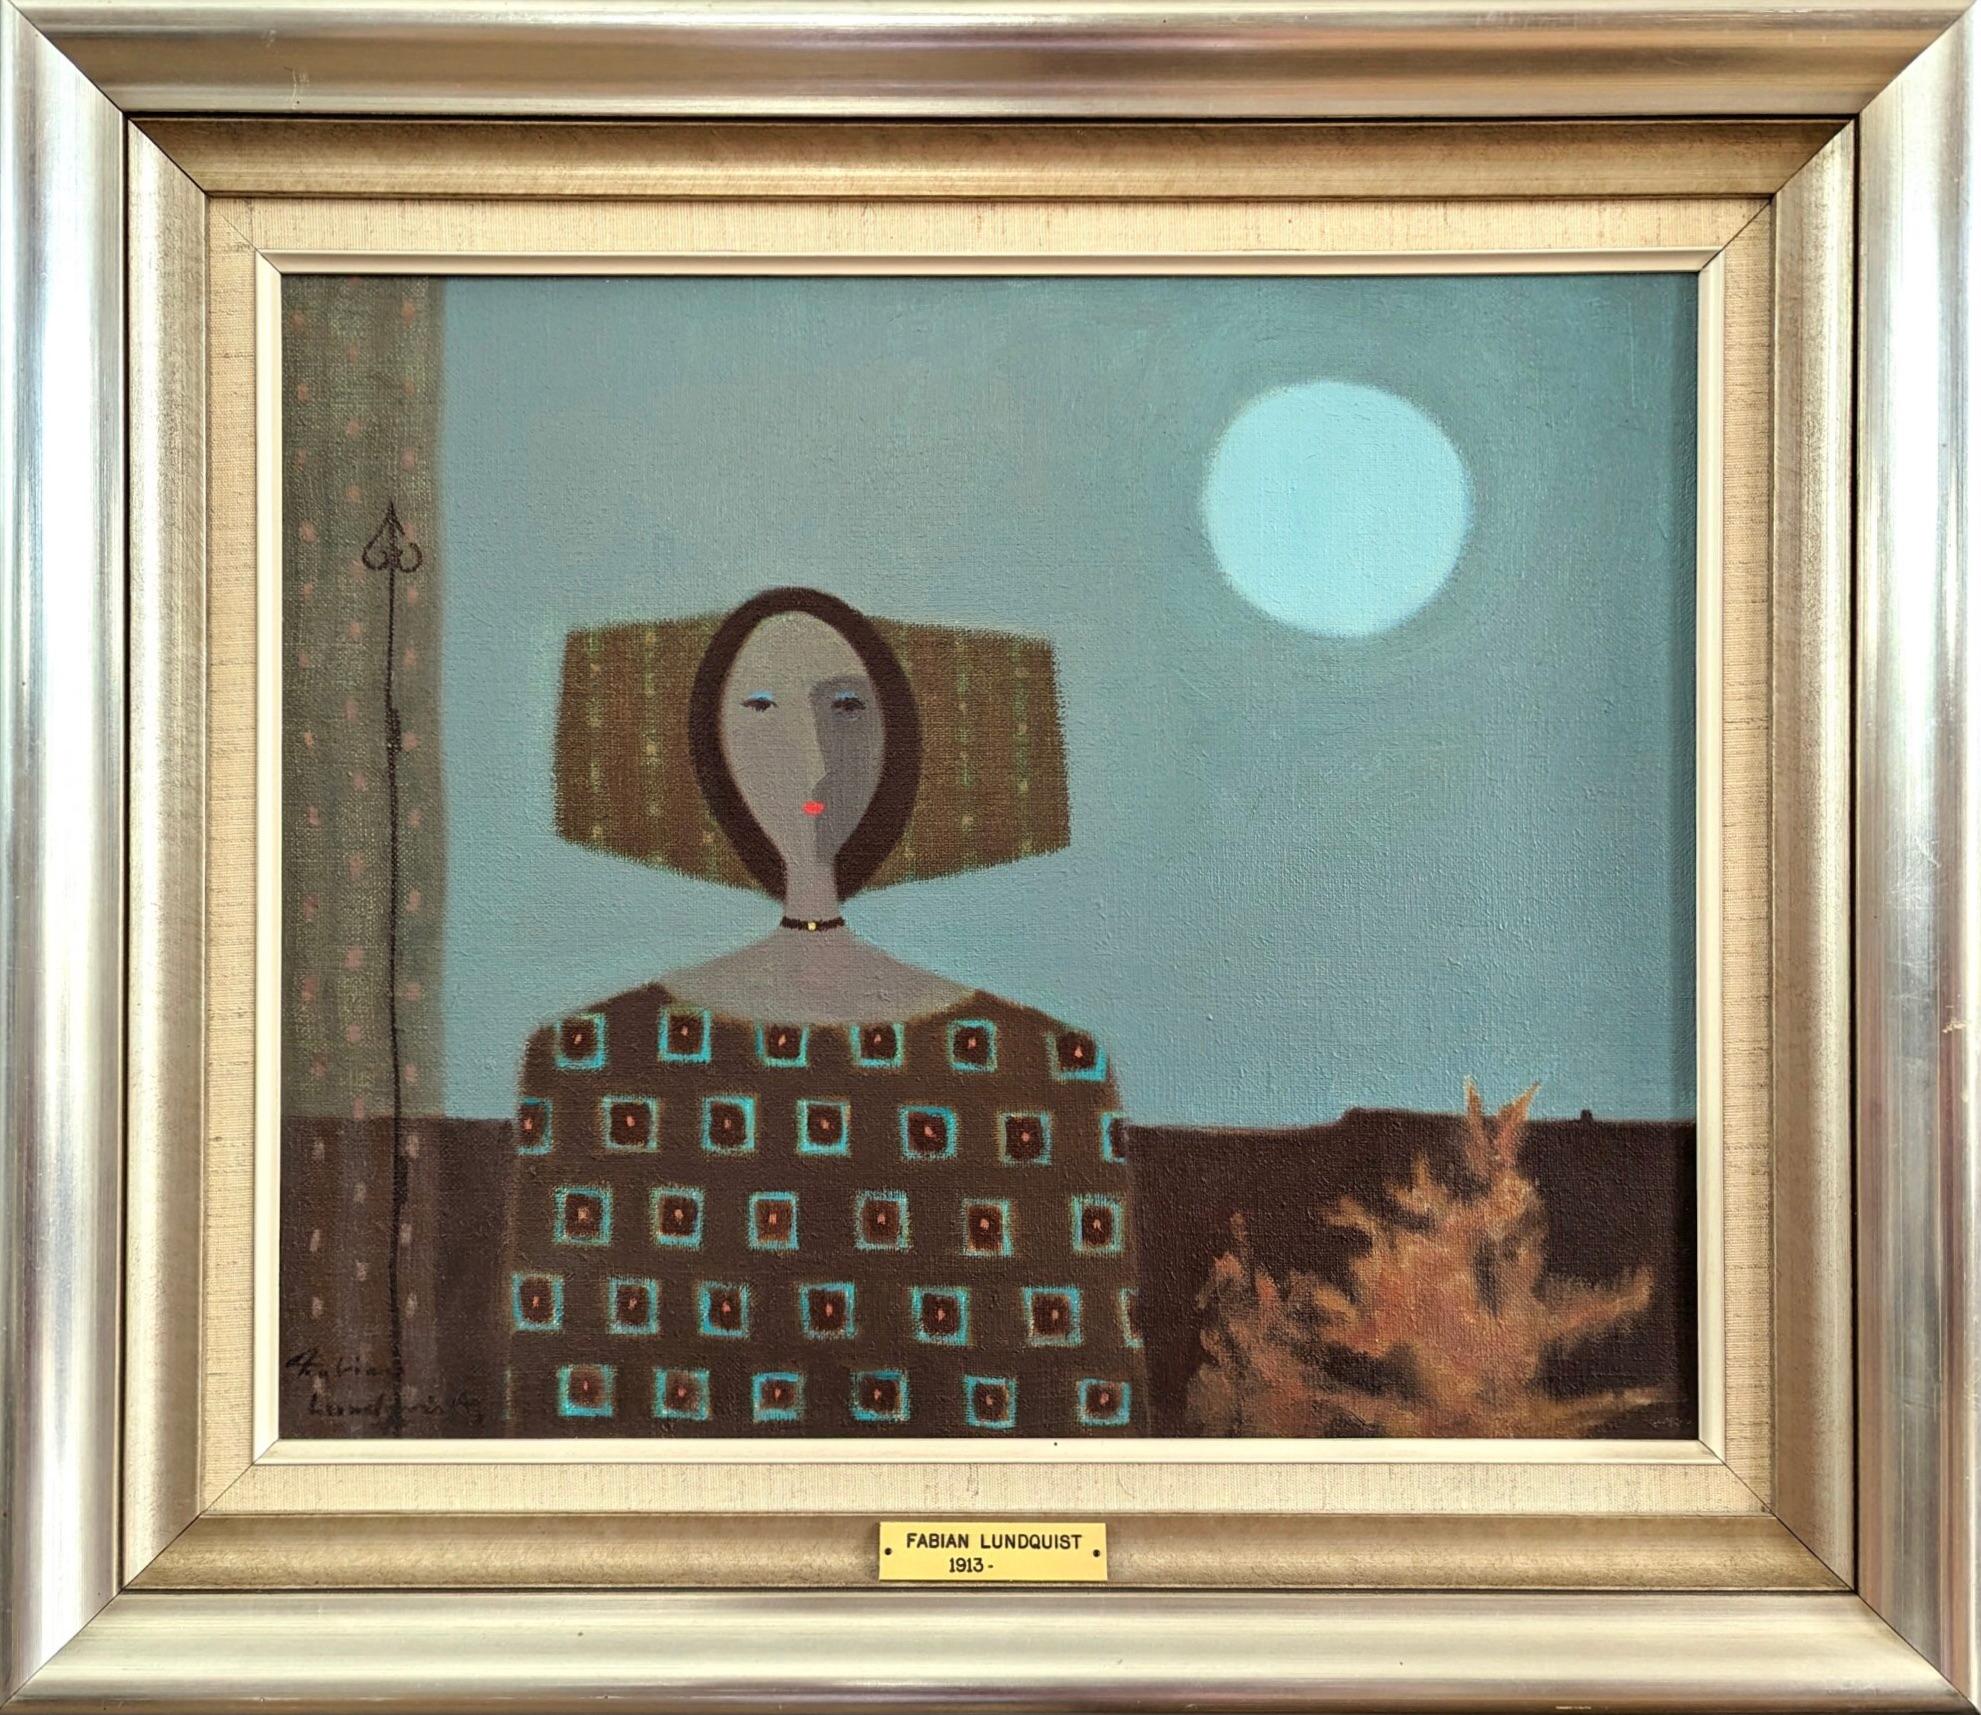 PORTRAIT BY MOONLIGHT
Size: 53.5 x 61.5cm (including frame)
Oil on Canvas

A brilliant mid-century figurative composition, executed in oil onto canvas by the established Swedish artist Fabian Lundqvist (1913-1989), whose works have been represented